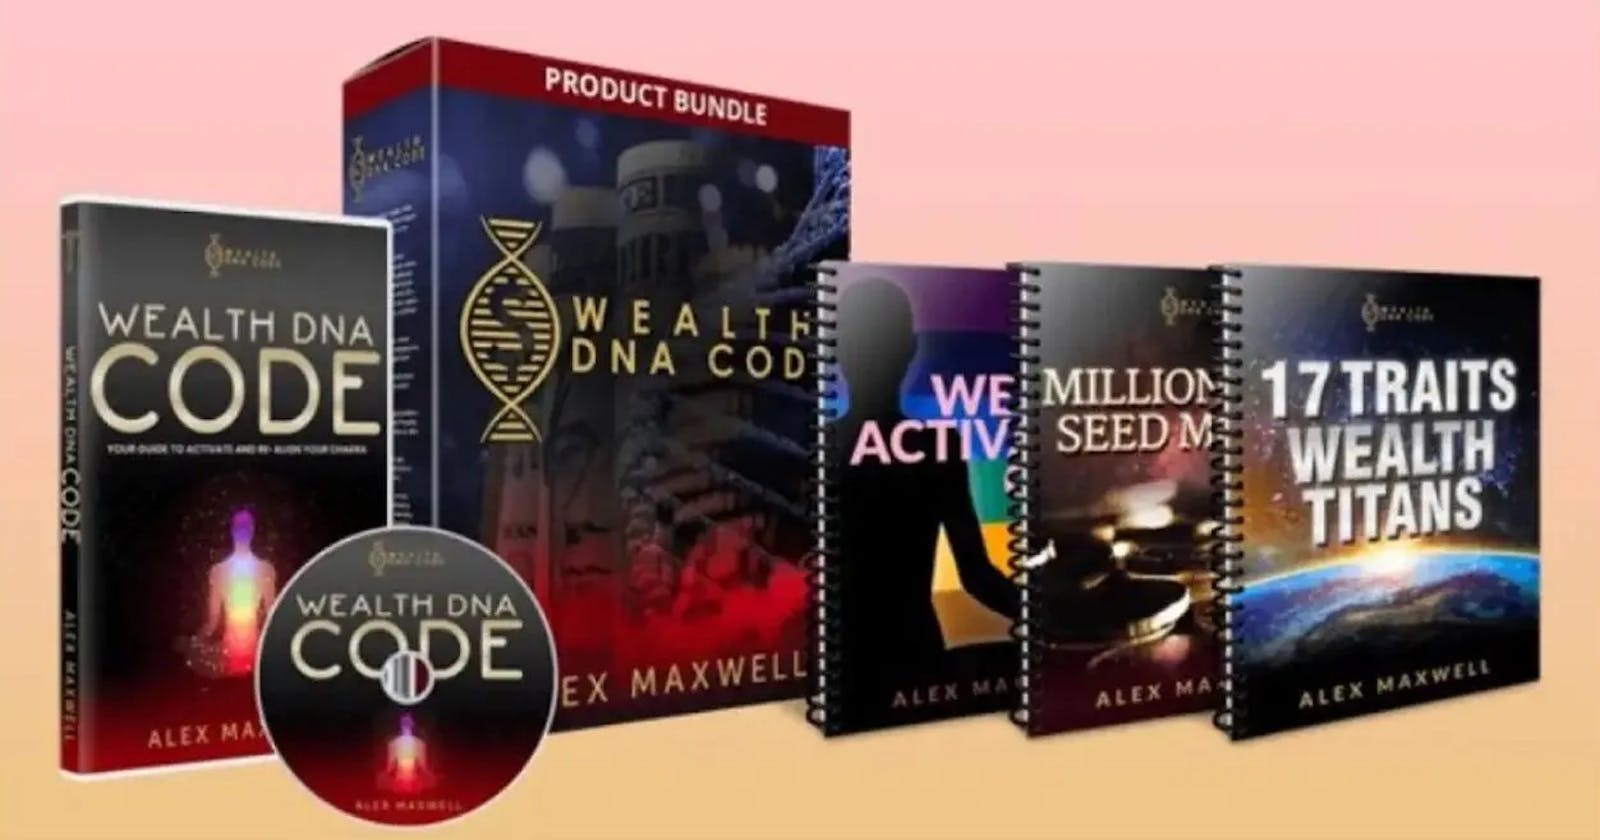 Wealth DNA Code Reviews All You Need To Know About Wealth DNA Code Offers!